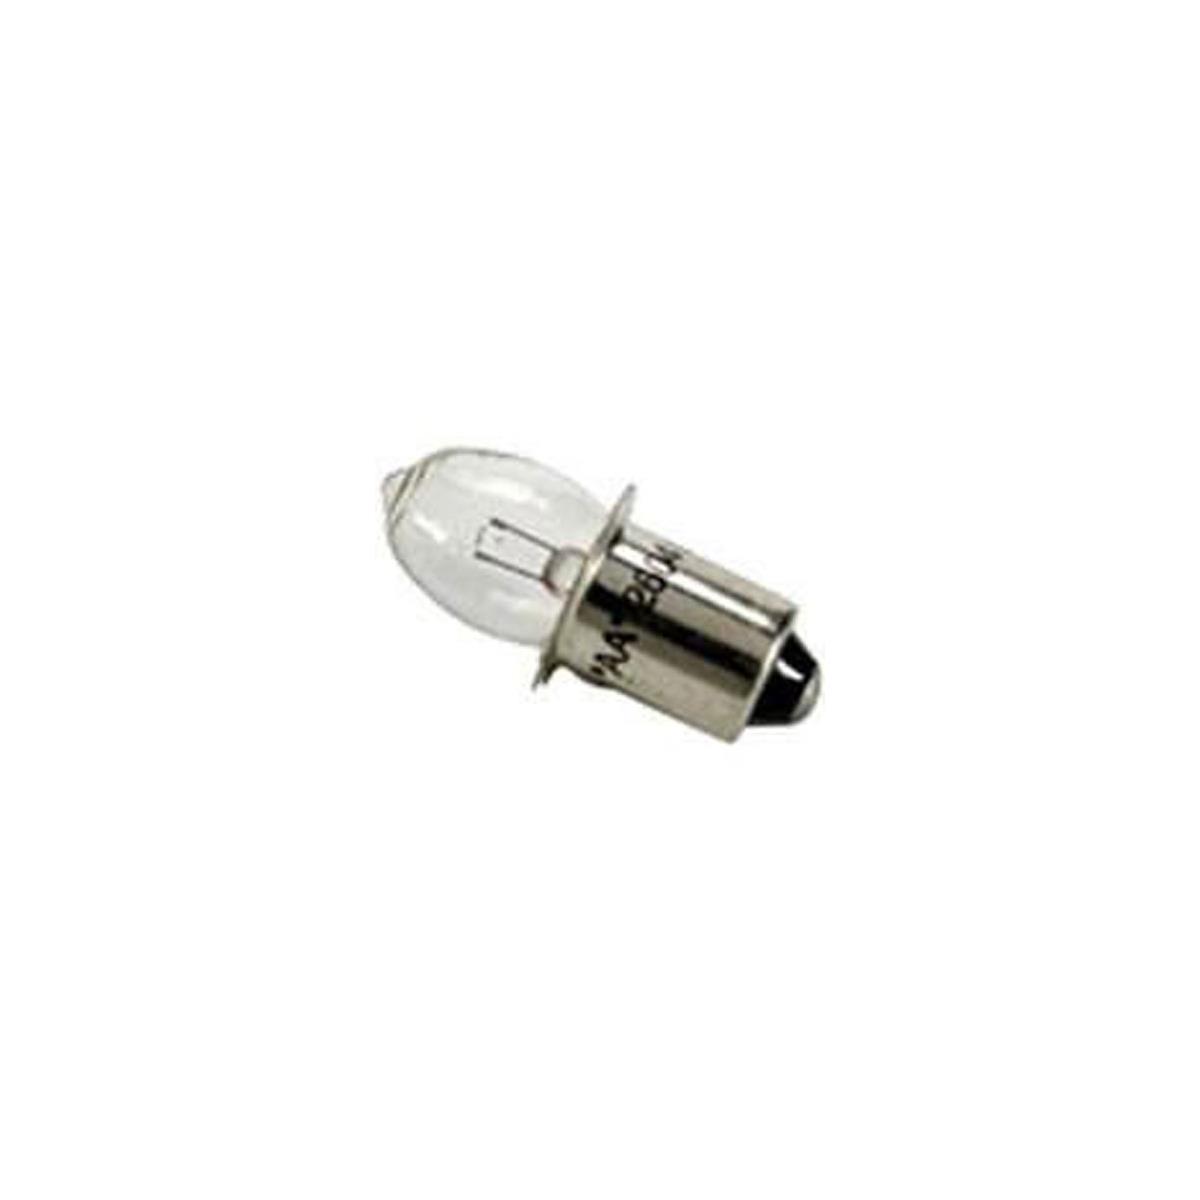 

Pelican 2604LM 3W 6V Xenon Low-Intensity Lamp for HeadsUp Lite 2600 Flashlight